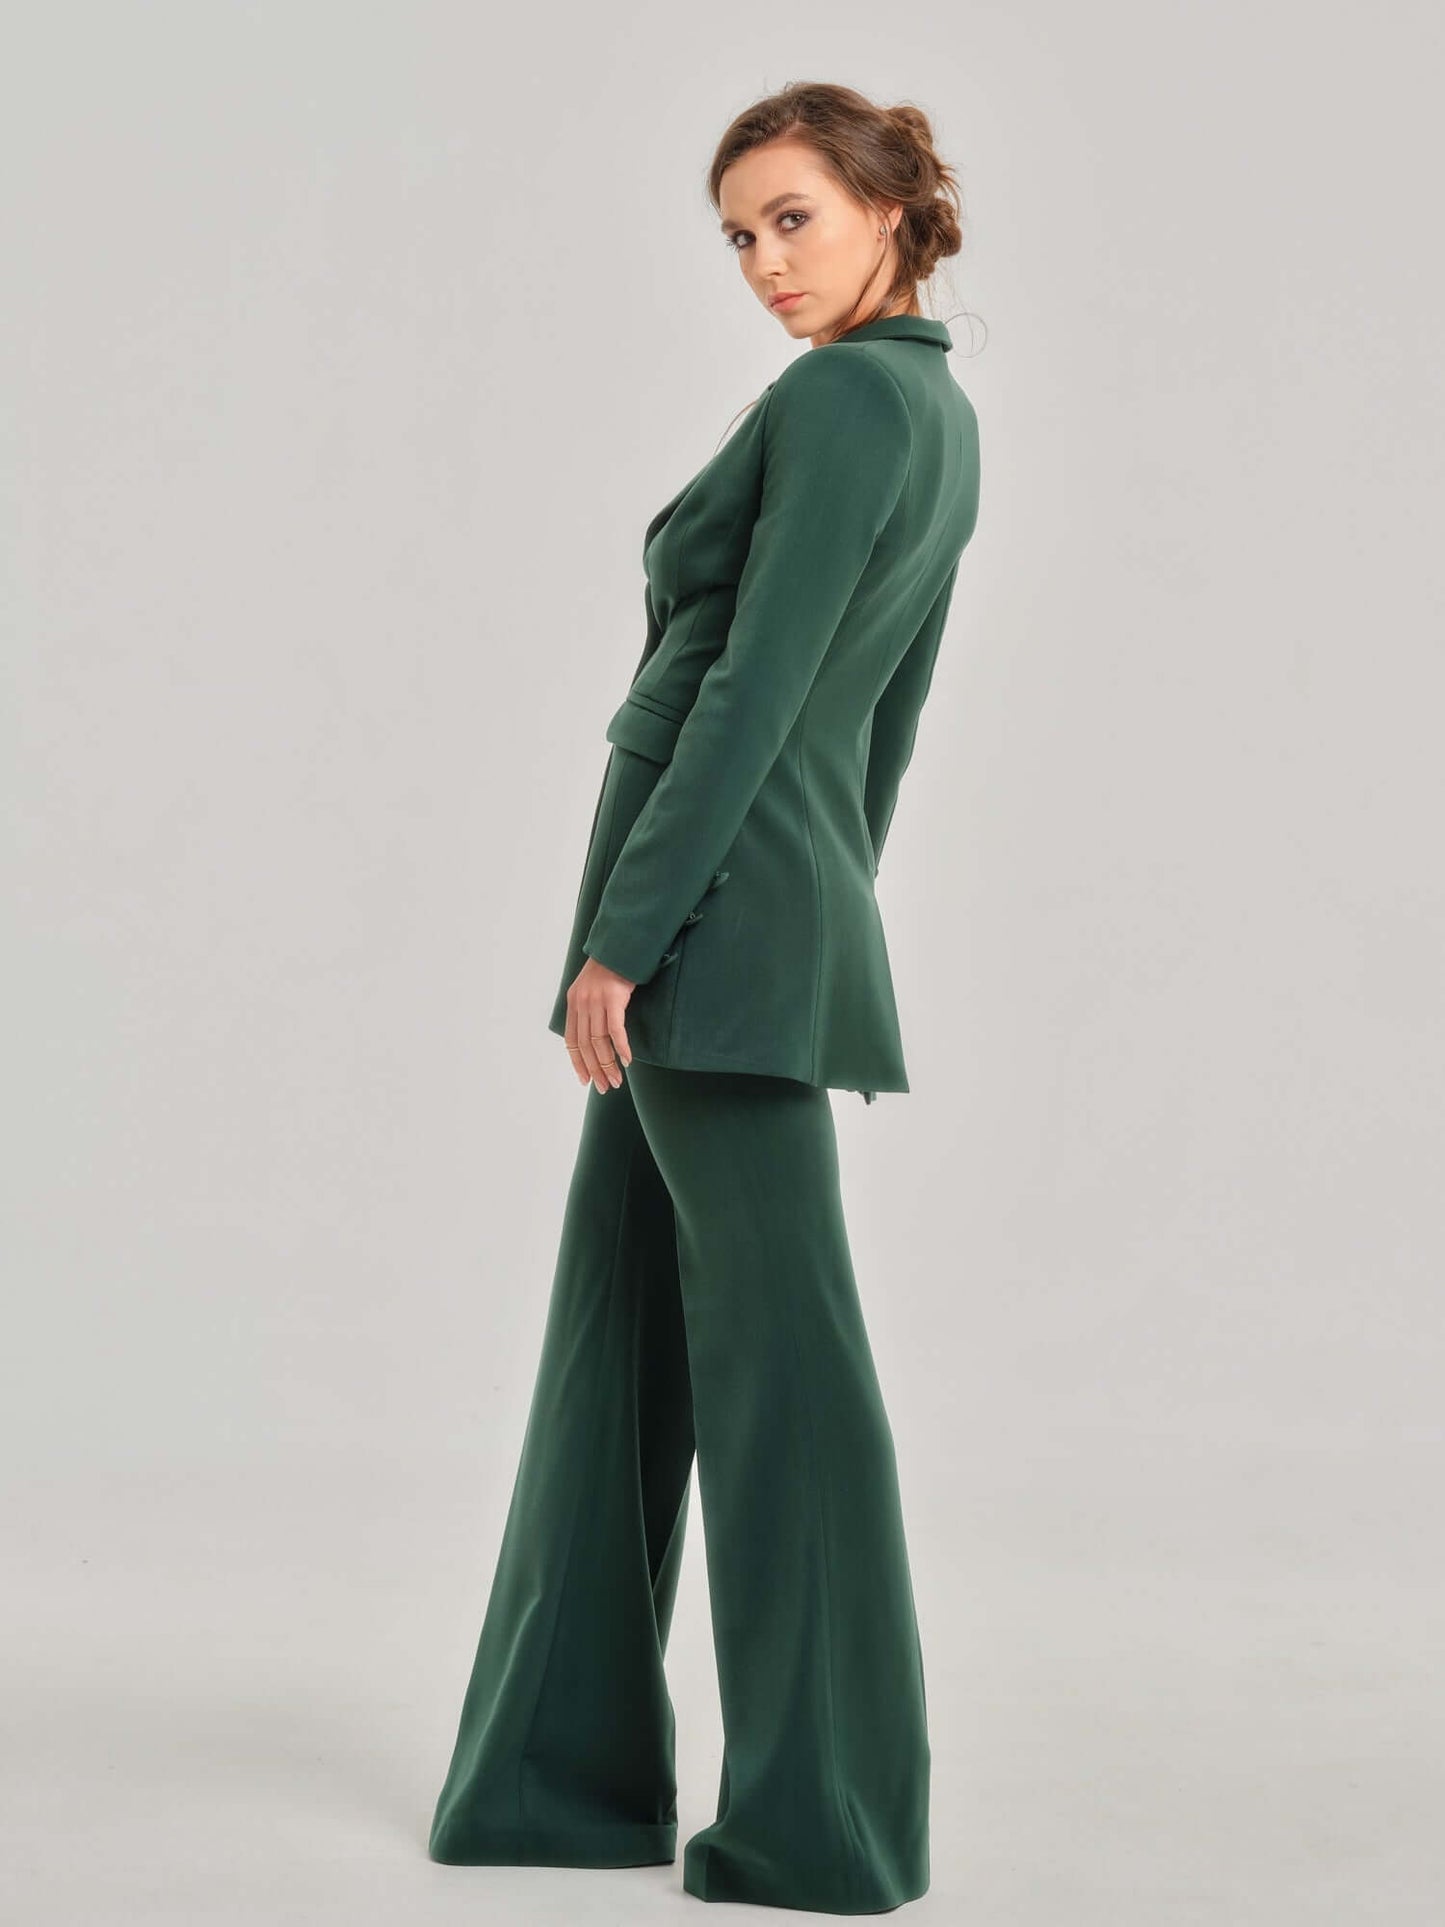 Tia Dorraine Emerald Dream High-Waist Flared Trousers These classic flared trousers would fit perfectly in any woman’s capsule wardrobe. With their full length, they can be worn with heeled boots or high heels in the office. The trousers feature a classic